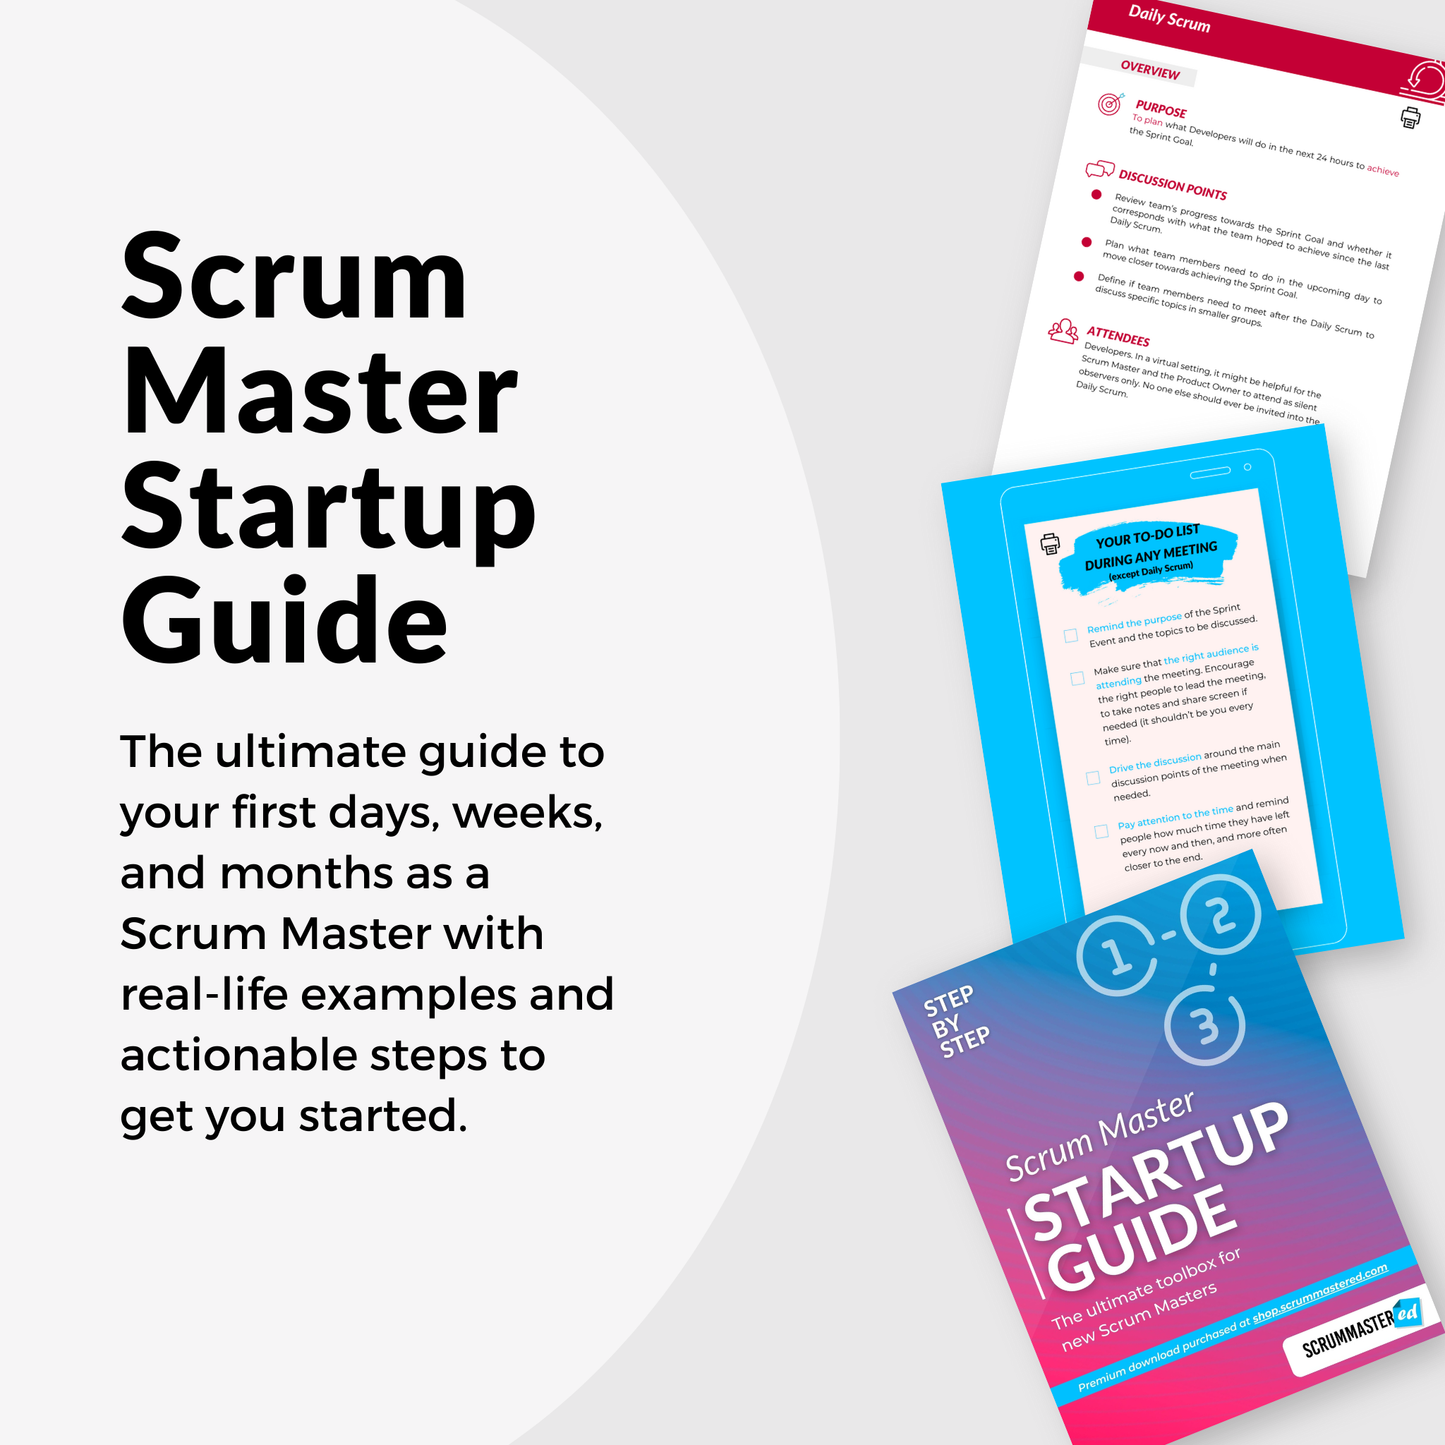 Bundle: Getting Started as a Scrum Master Must-Haves